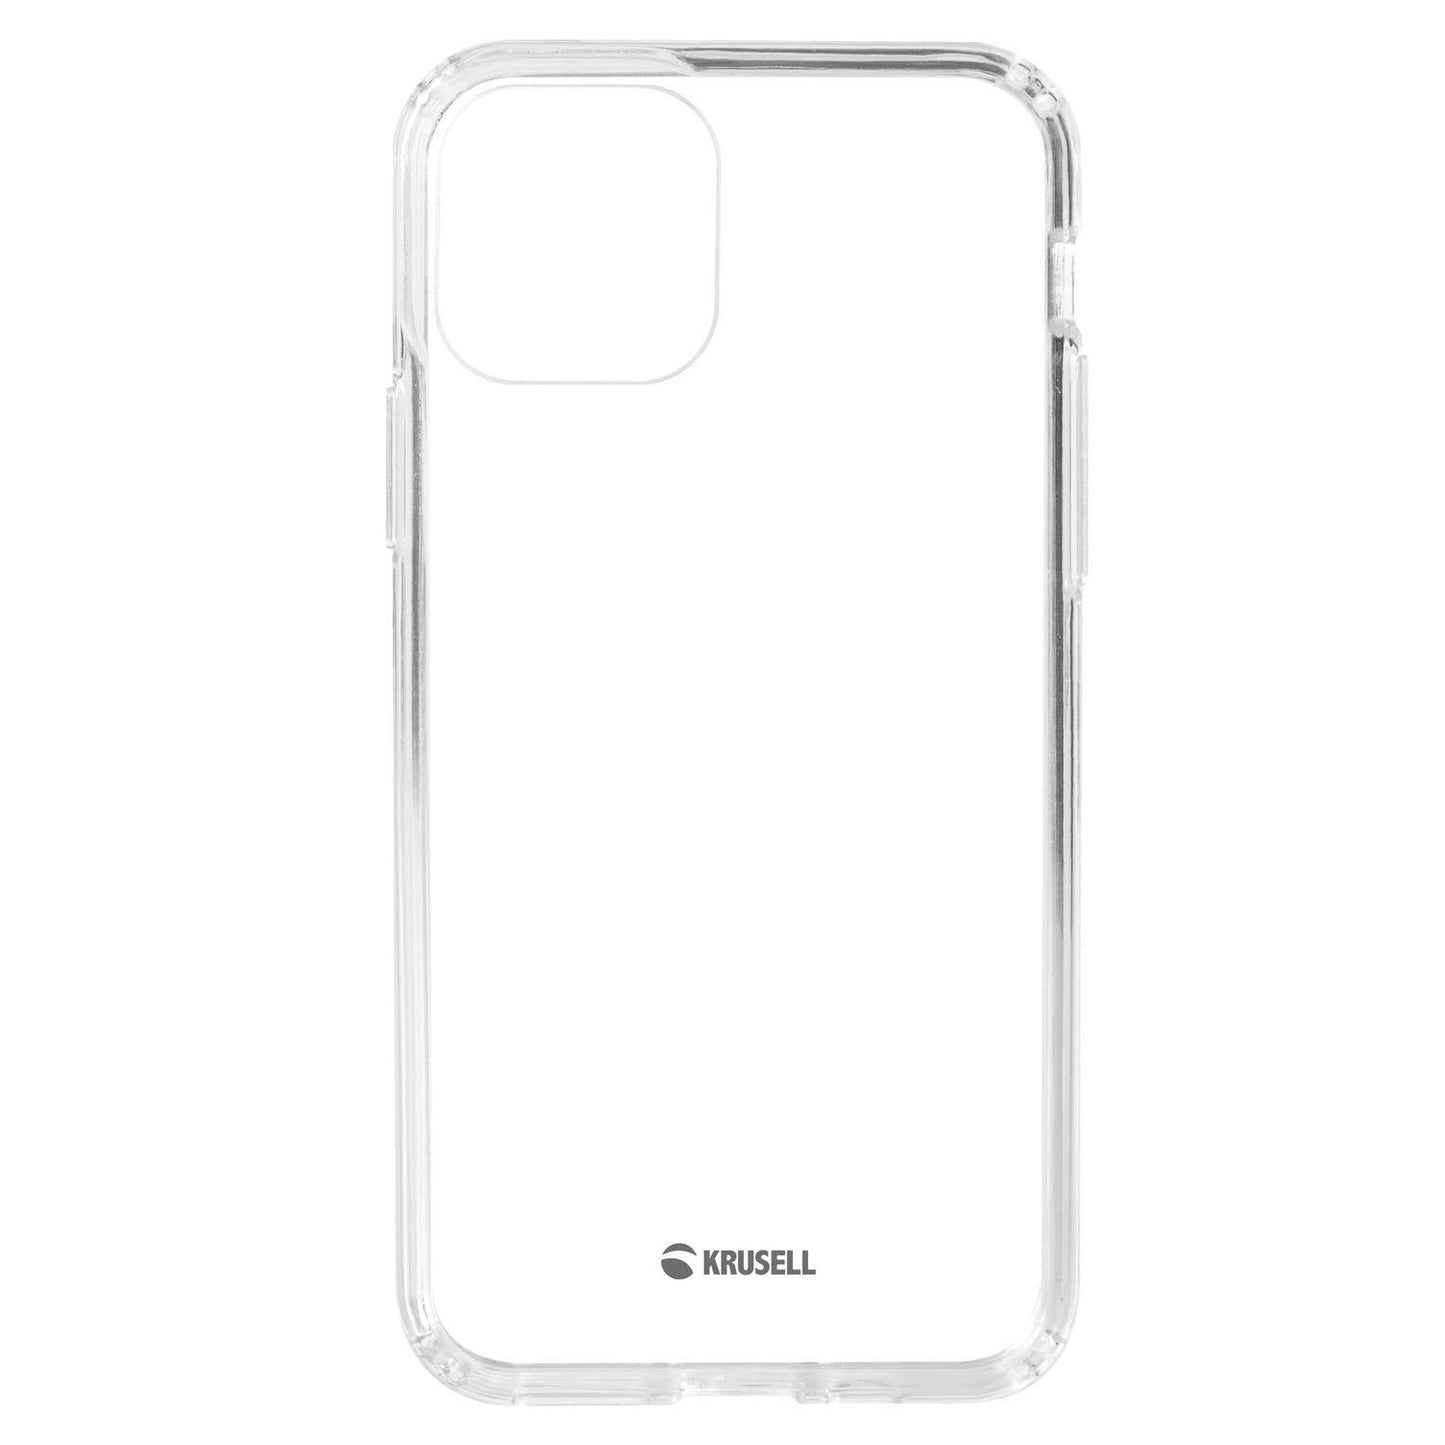 Hard Cover for iPhone 12 Pro Max